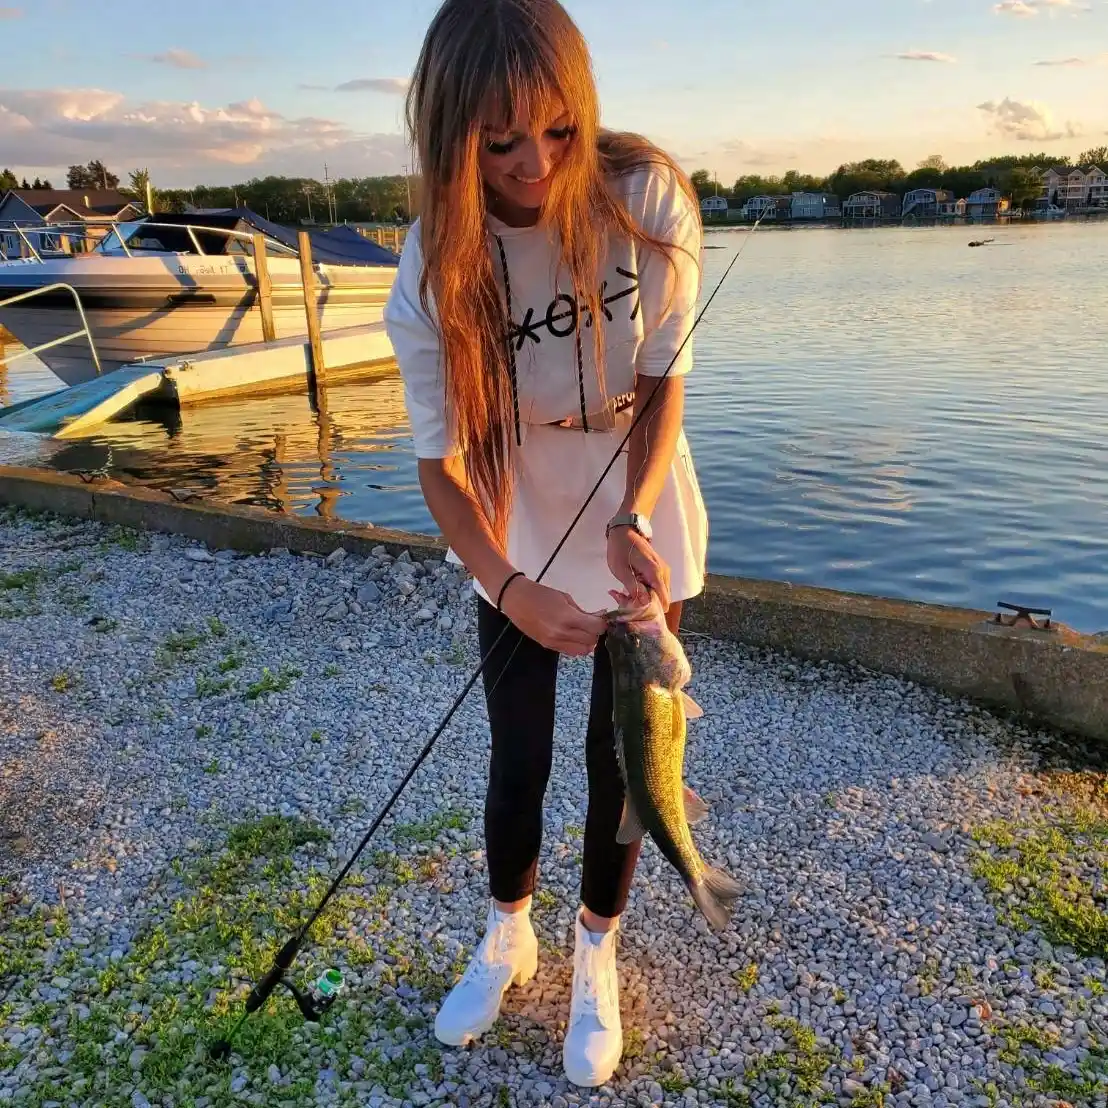 ᐅ East Harbor fishing reports🎣• Port Clinton, OH (United States) fishing